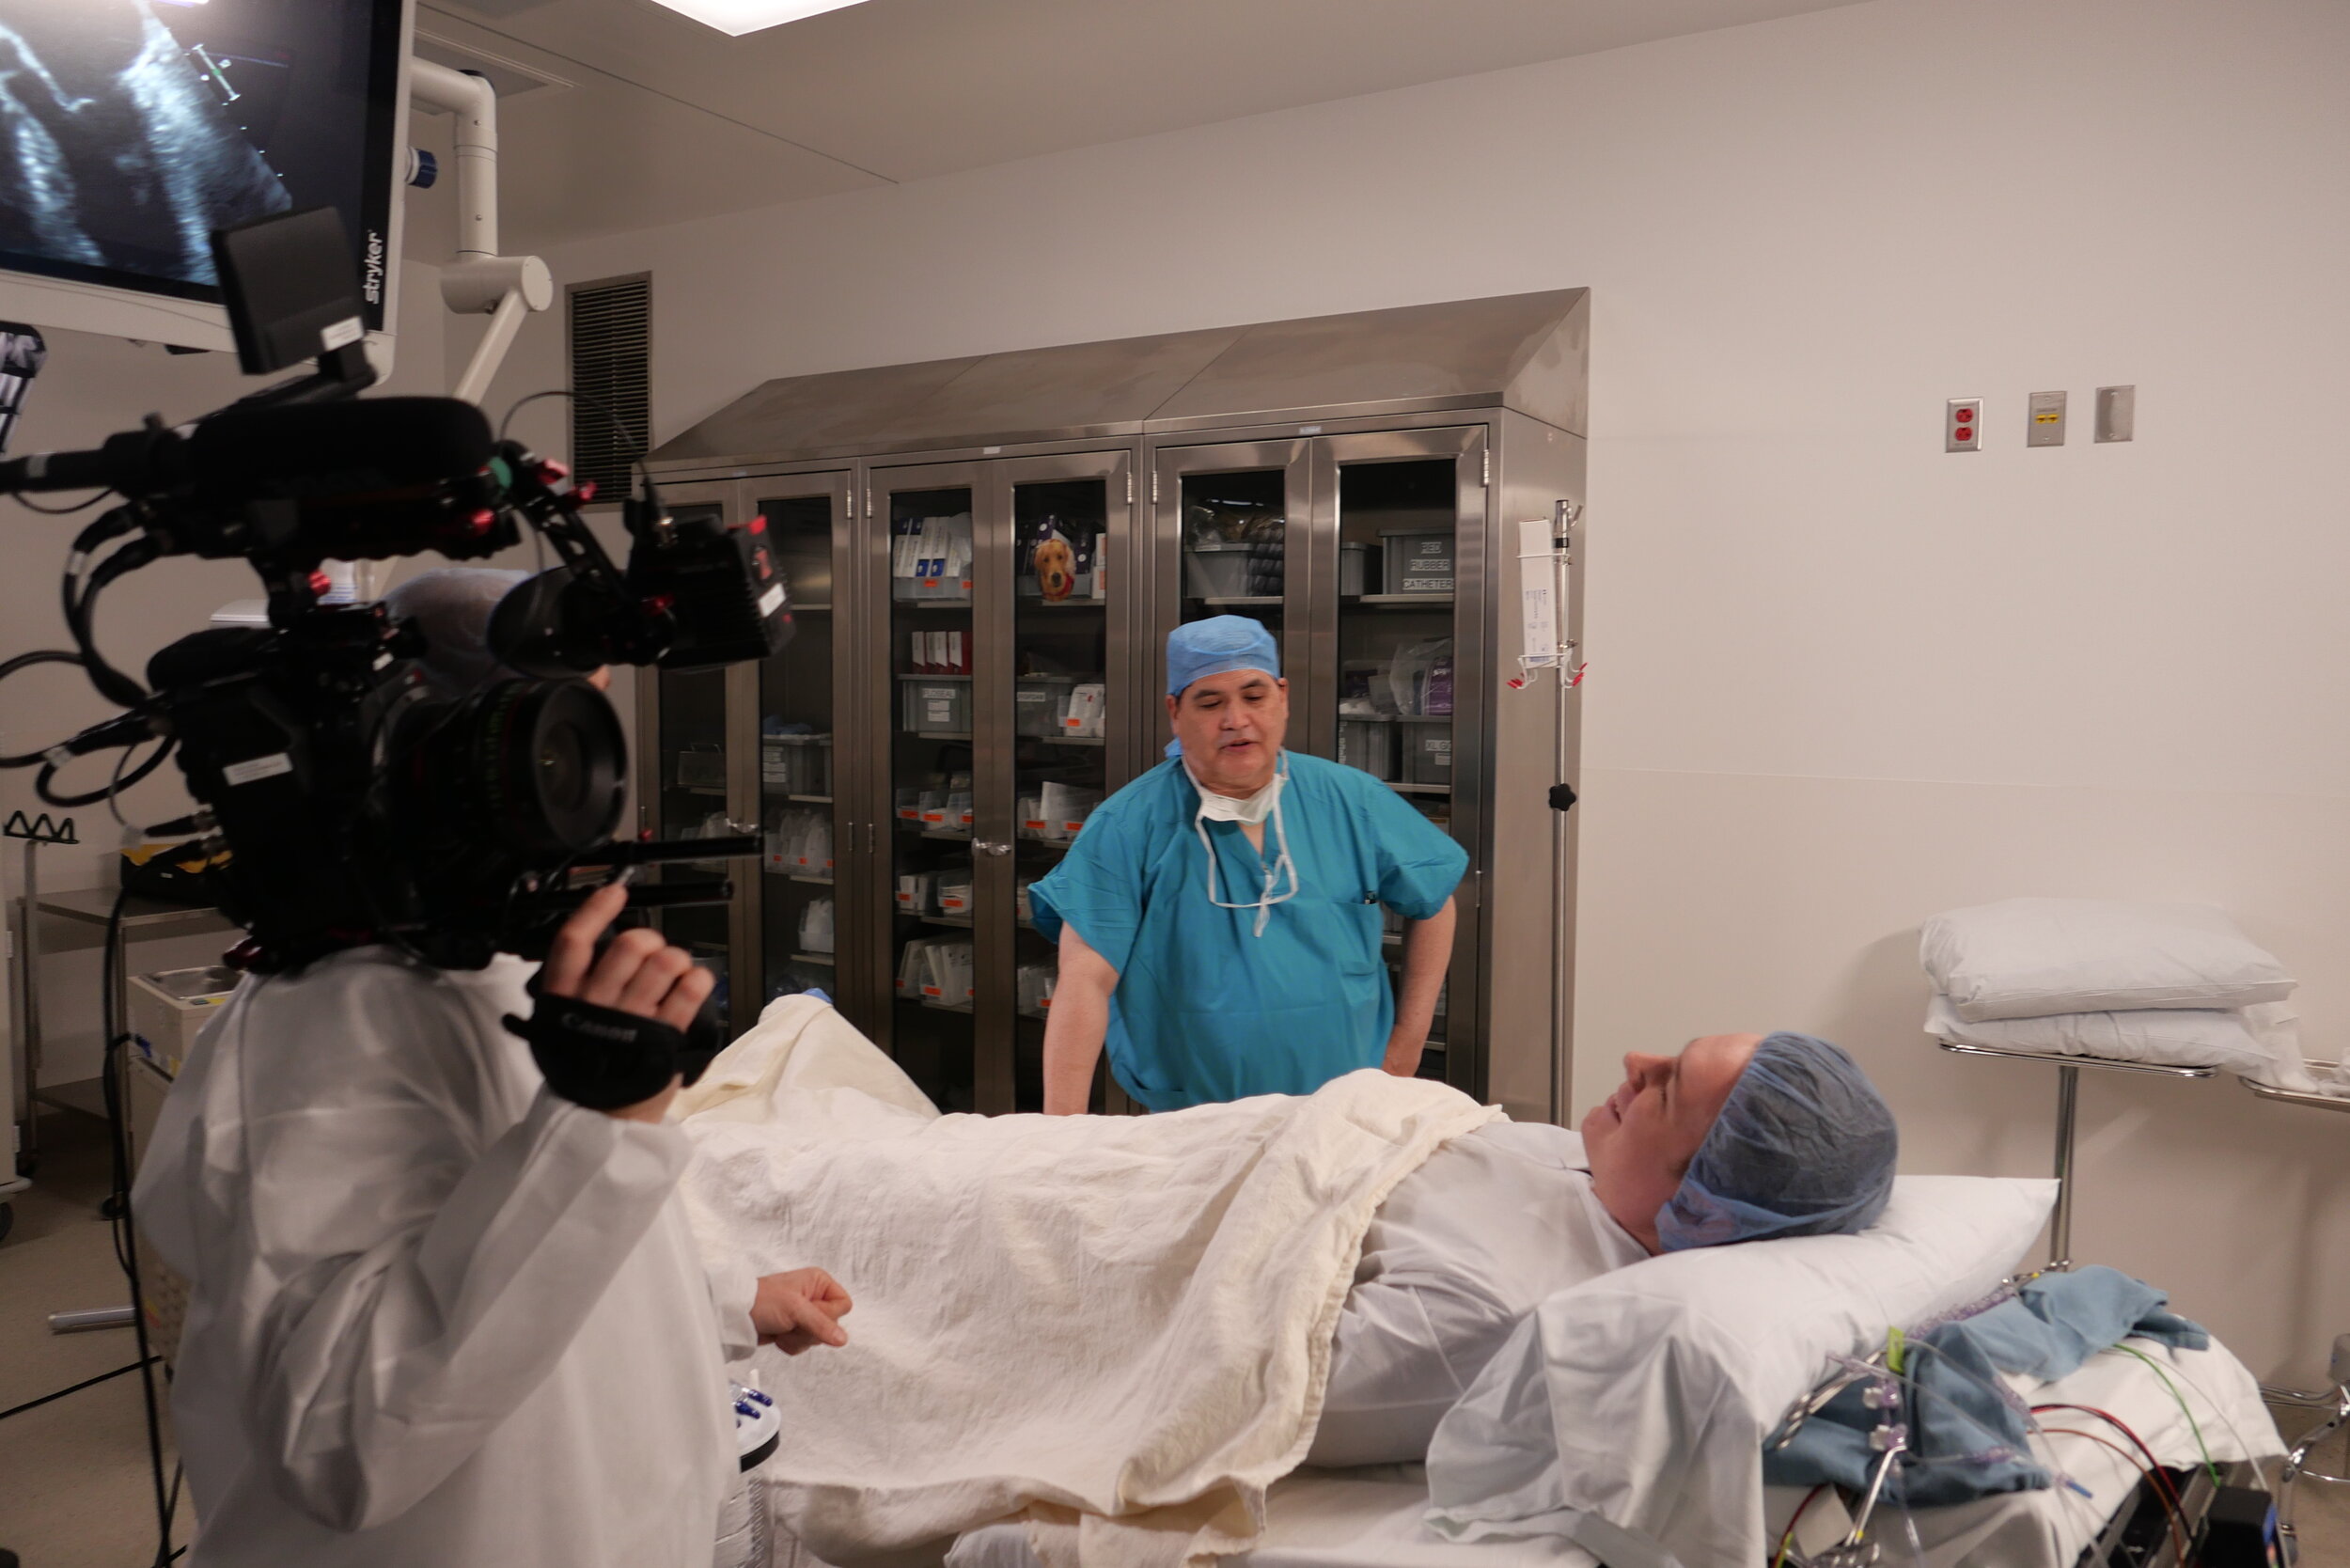 Jordan made his on-camera acting debut for Soulcraft to get some footage with Dr. Binder in the operating room. It was a surreal experience for him – “not so much because I’m on a table in an operating room, but because I’m using my theatre degree.”